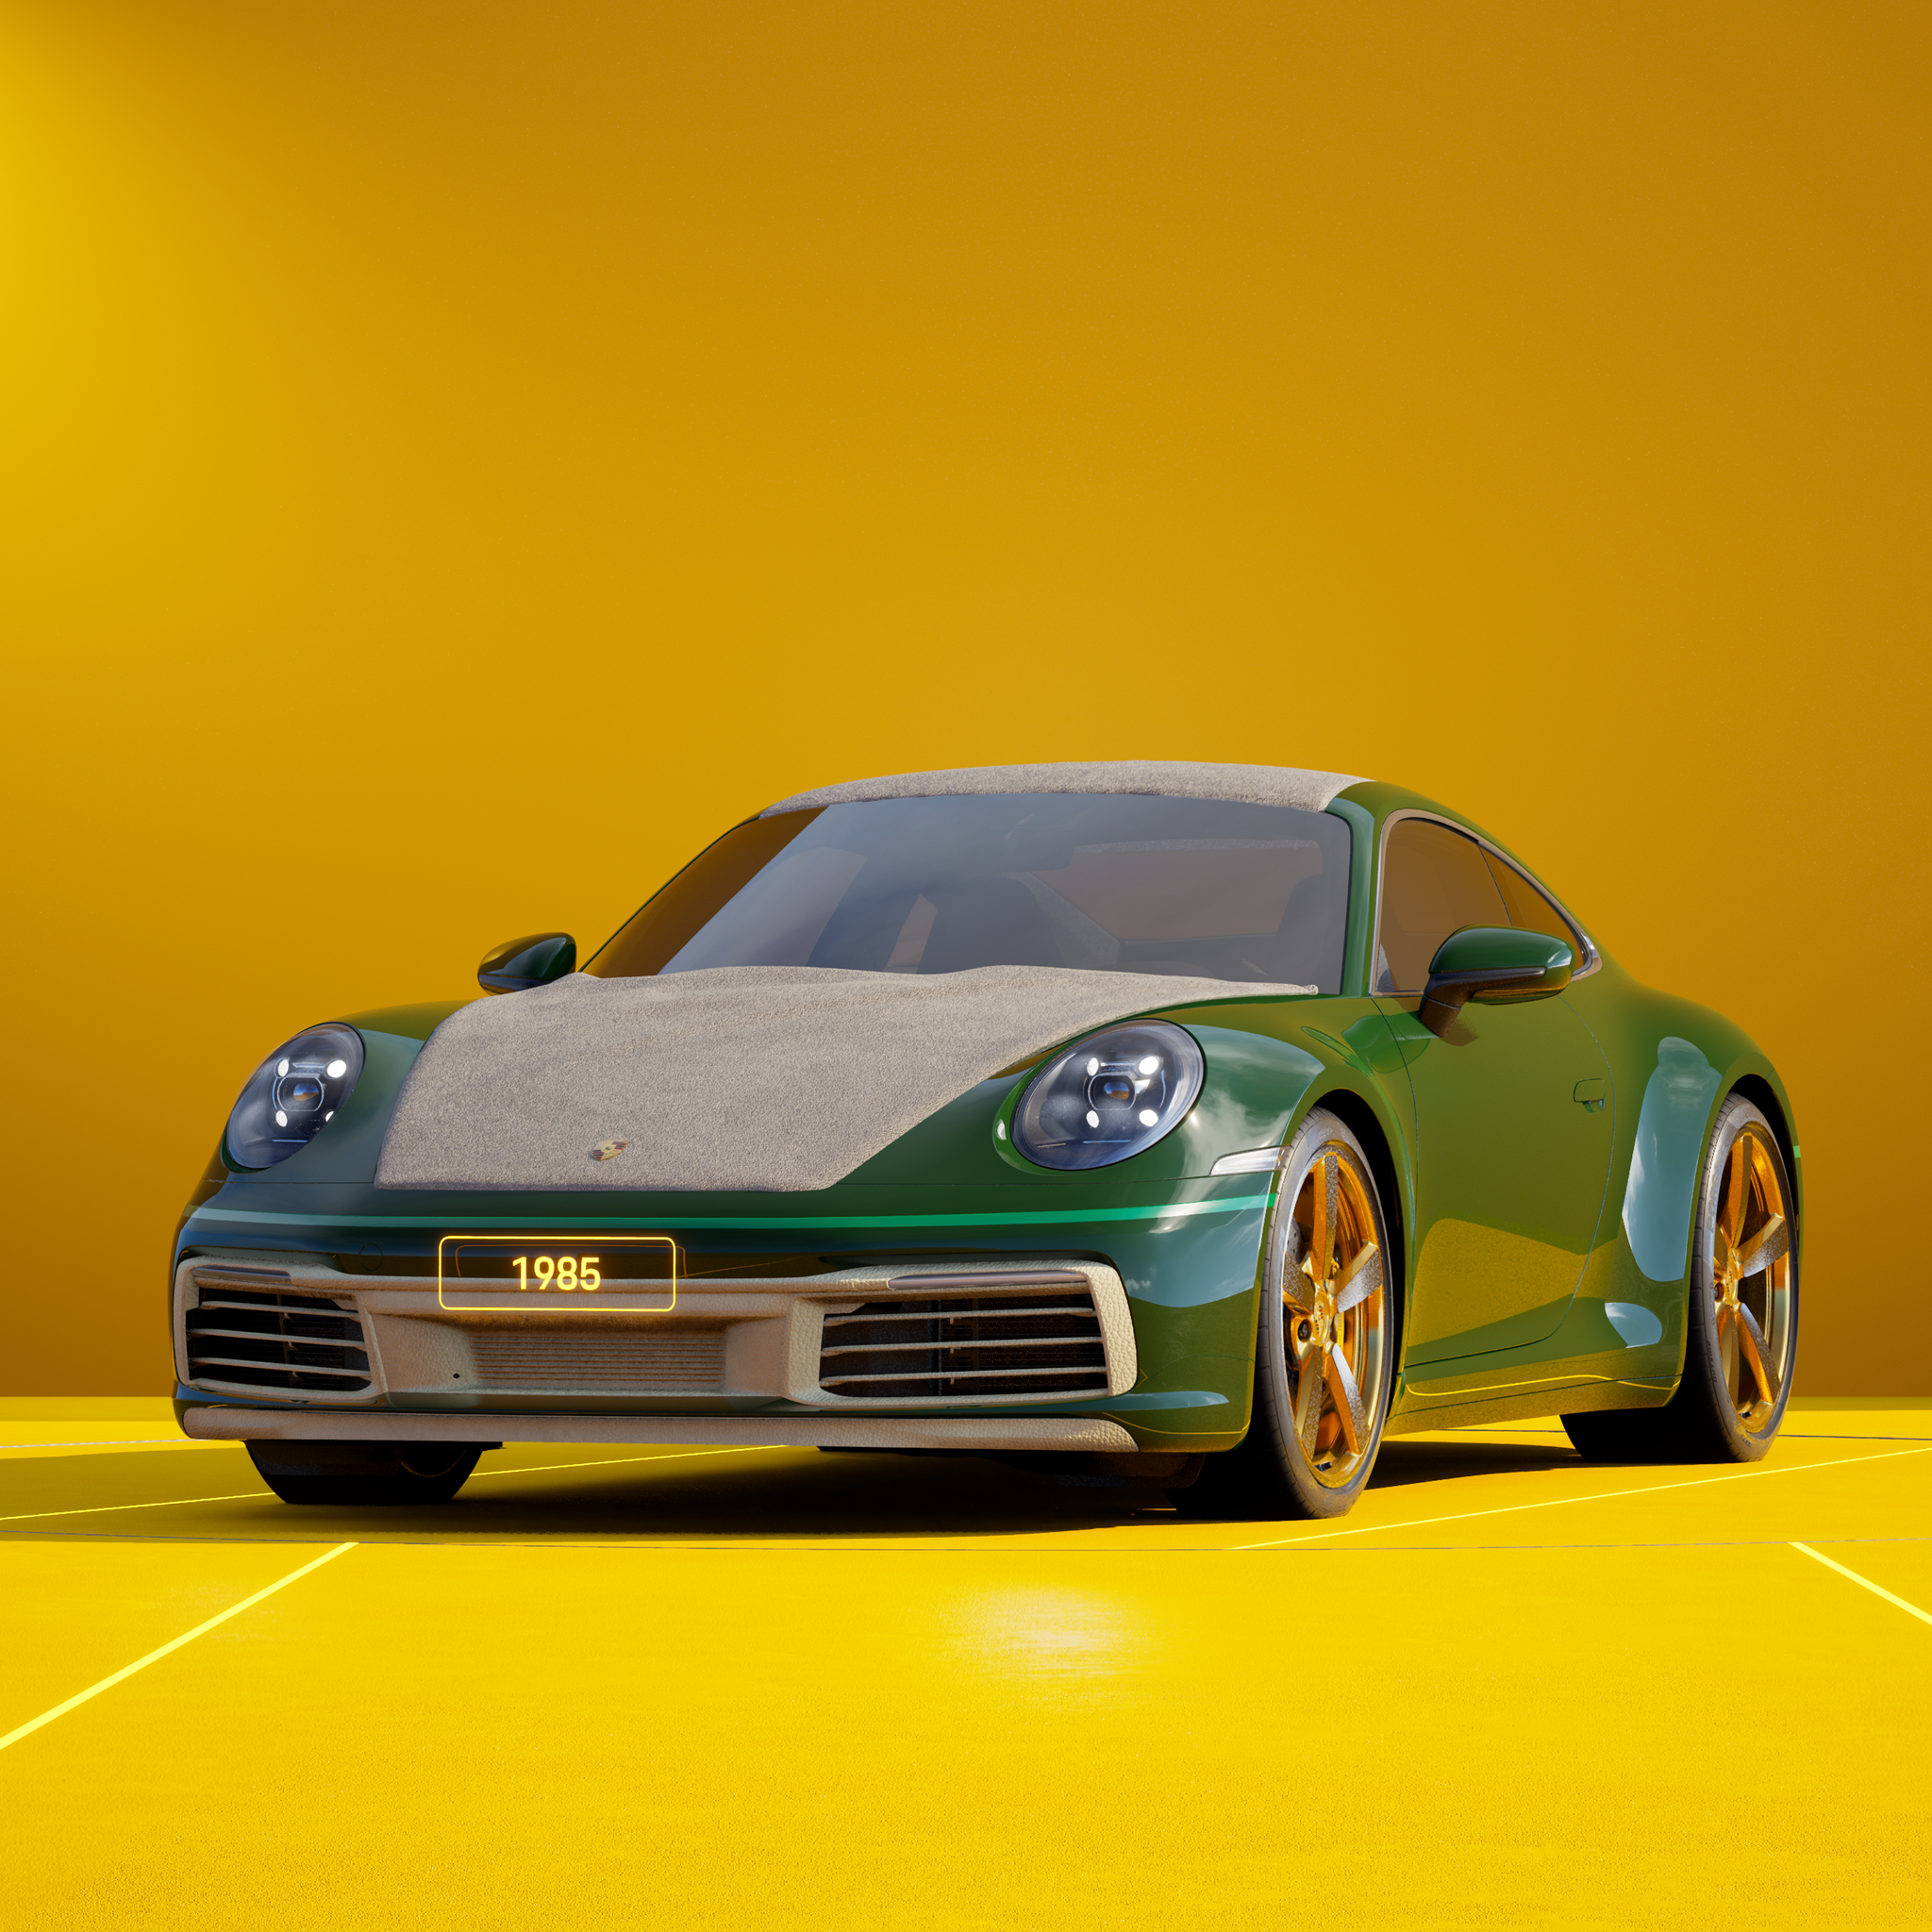 The PORSCHΞ 911 1985 image in phase